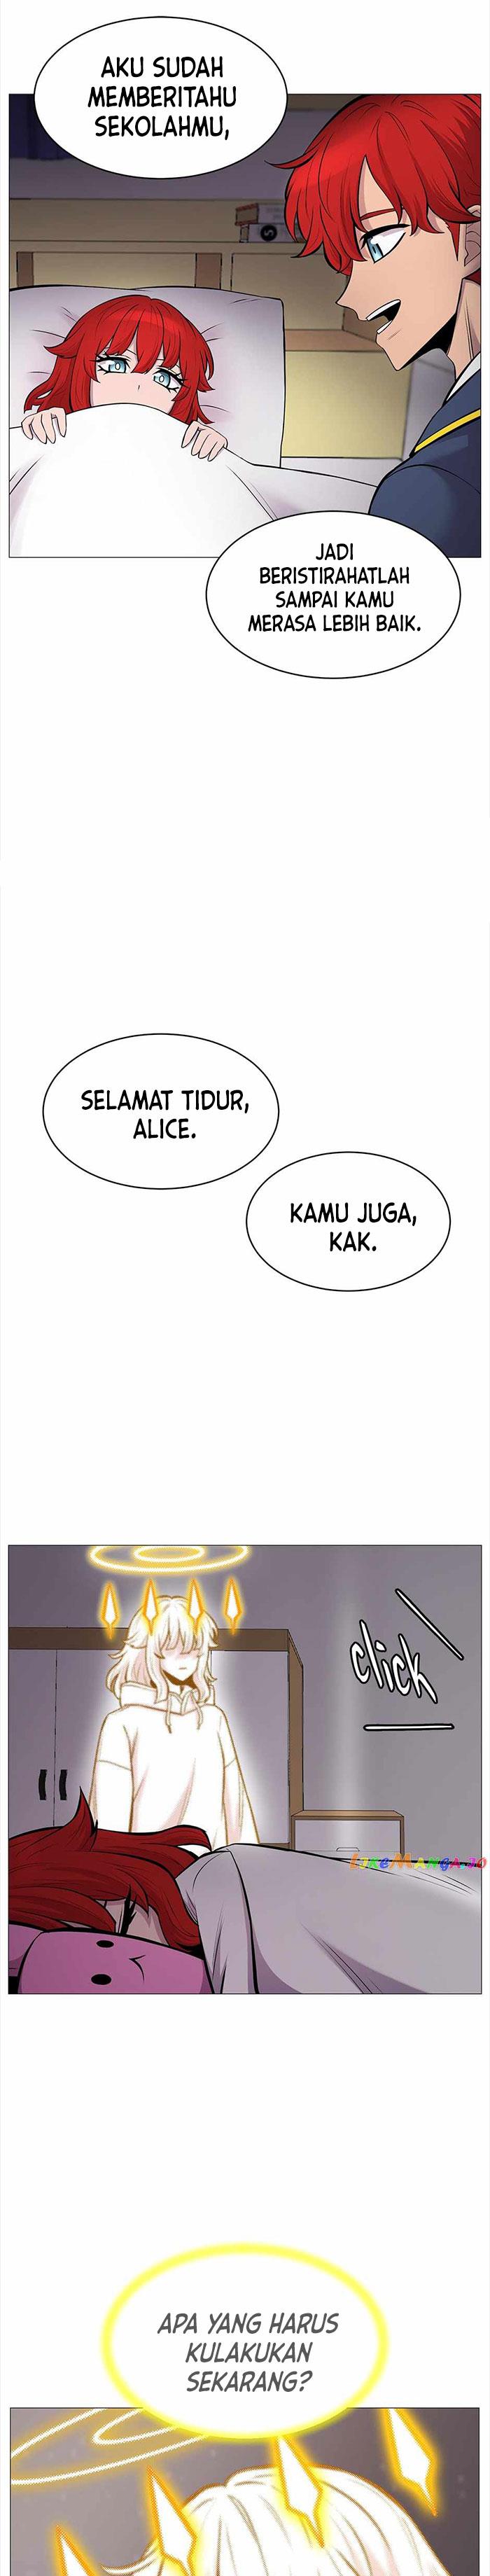 Updater Chapter 125